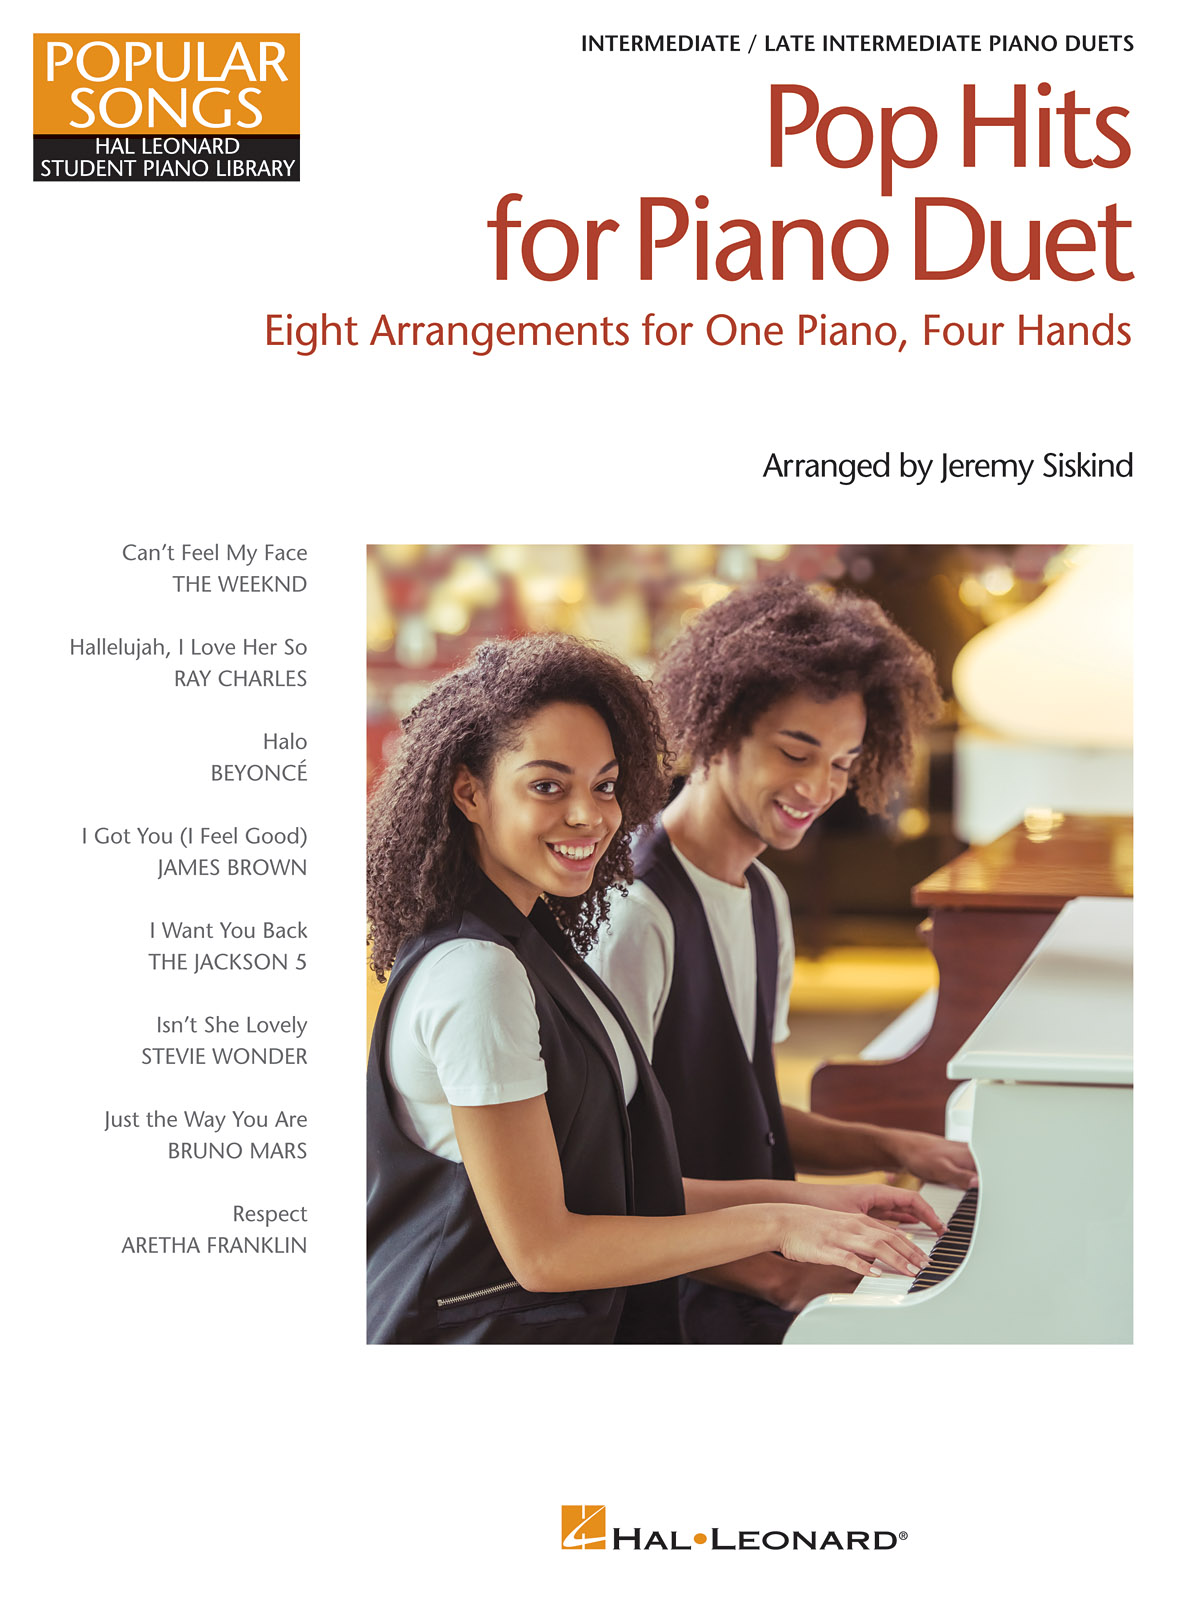 Pop Hits for Piano Duet - Popular Songs Series - 8 Arrangements for One Piano, Four Hands